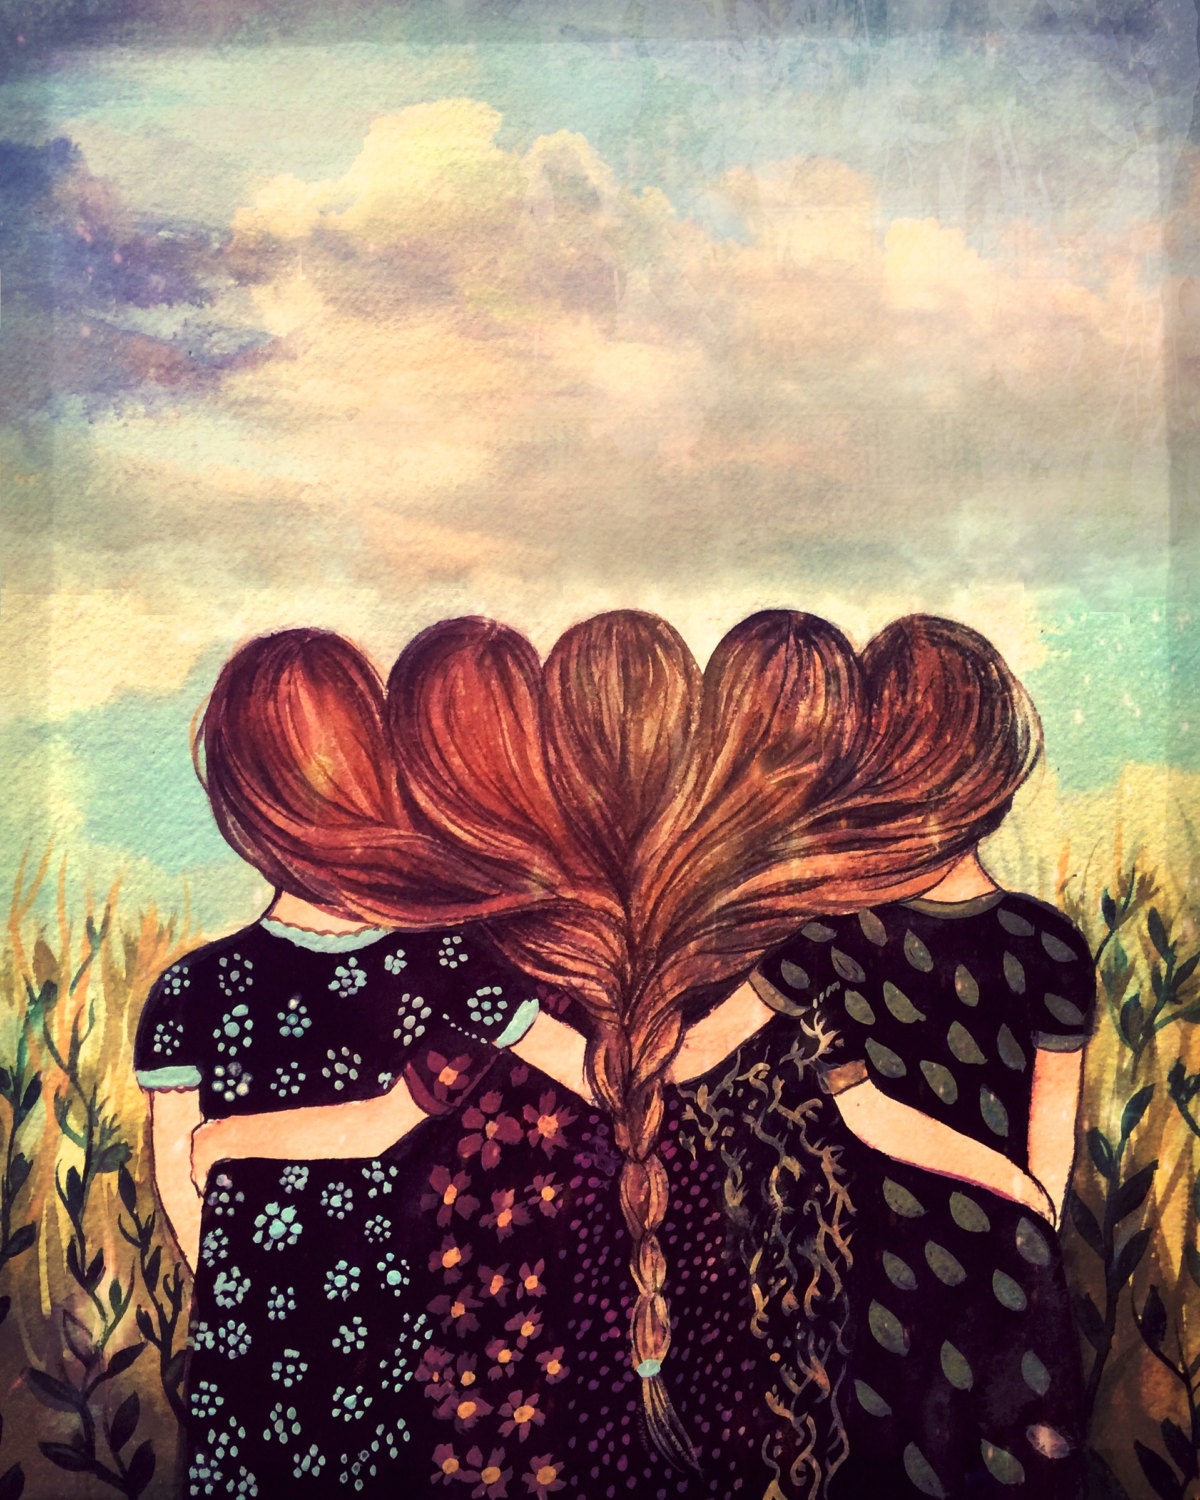 Buy Five Sisters Best Friends With Brown and Reddish Hair Art ...